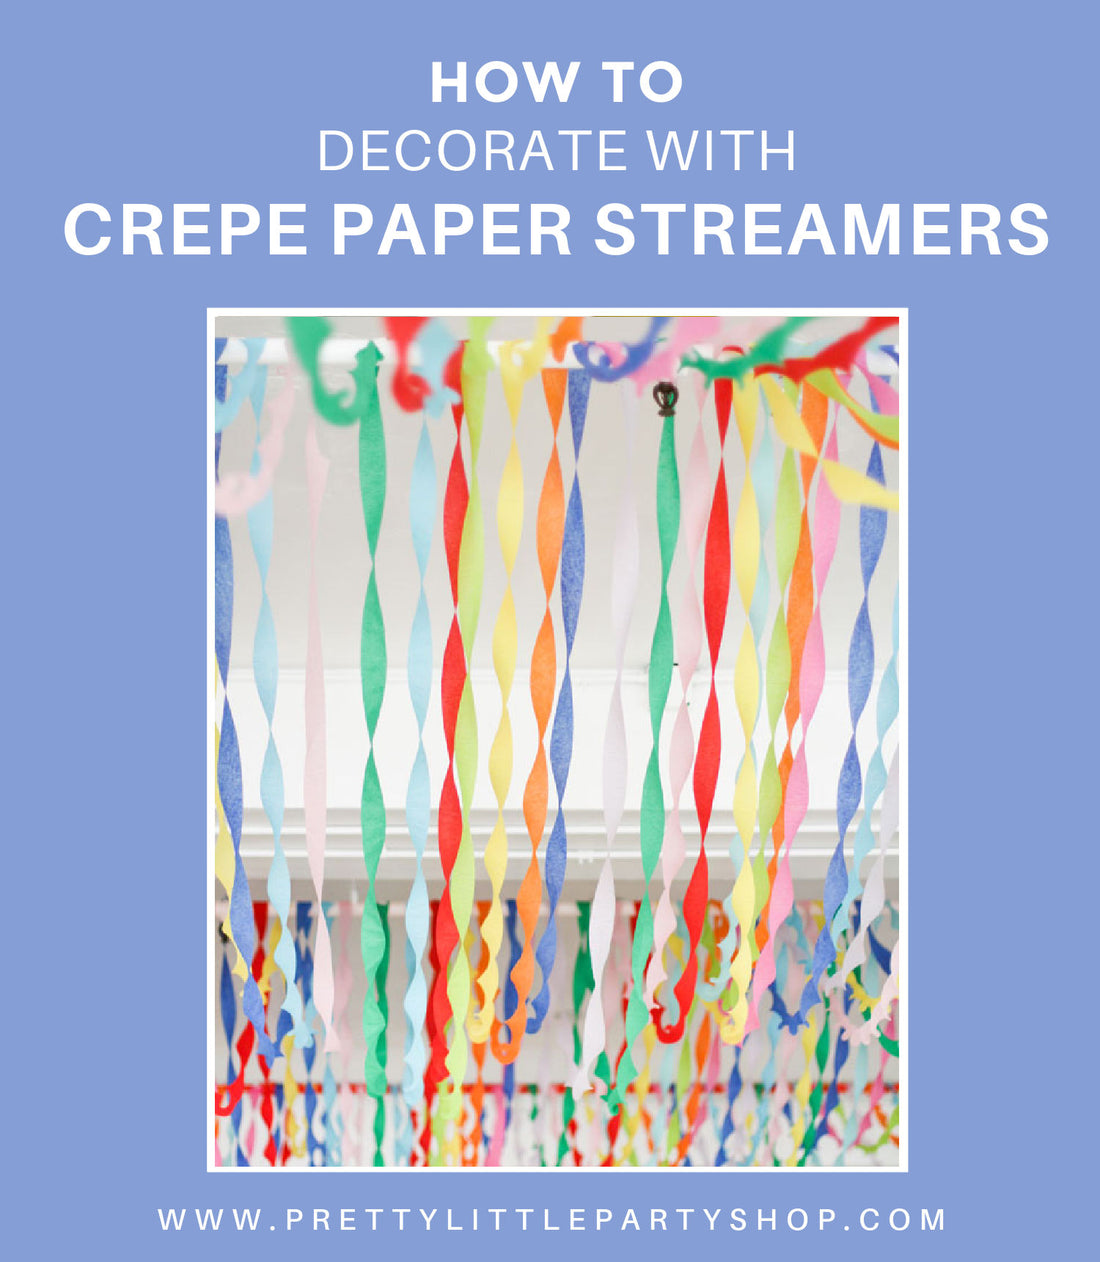 13+ Uses for Crepe Streamers in Parties - Spot of Tea Designs